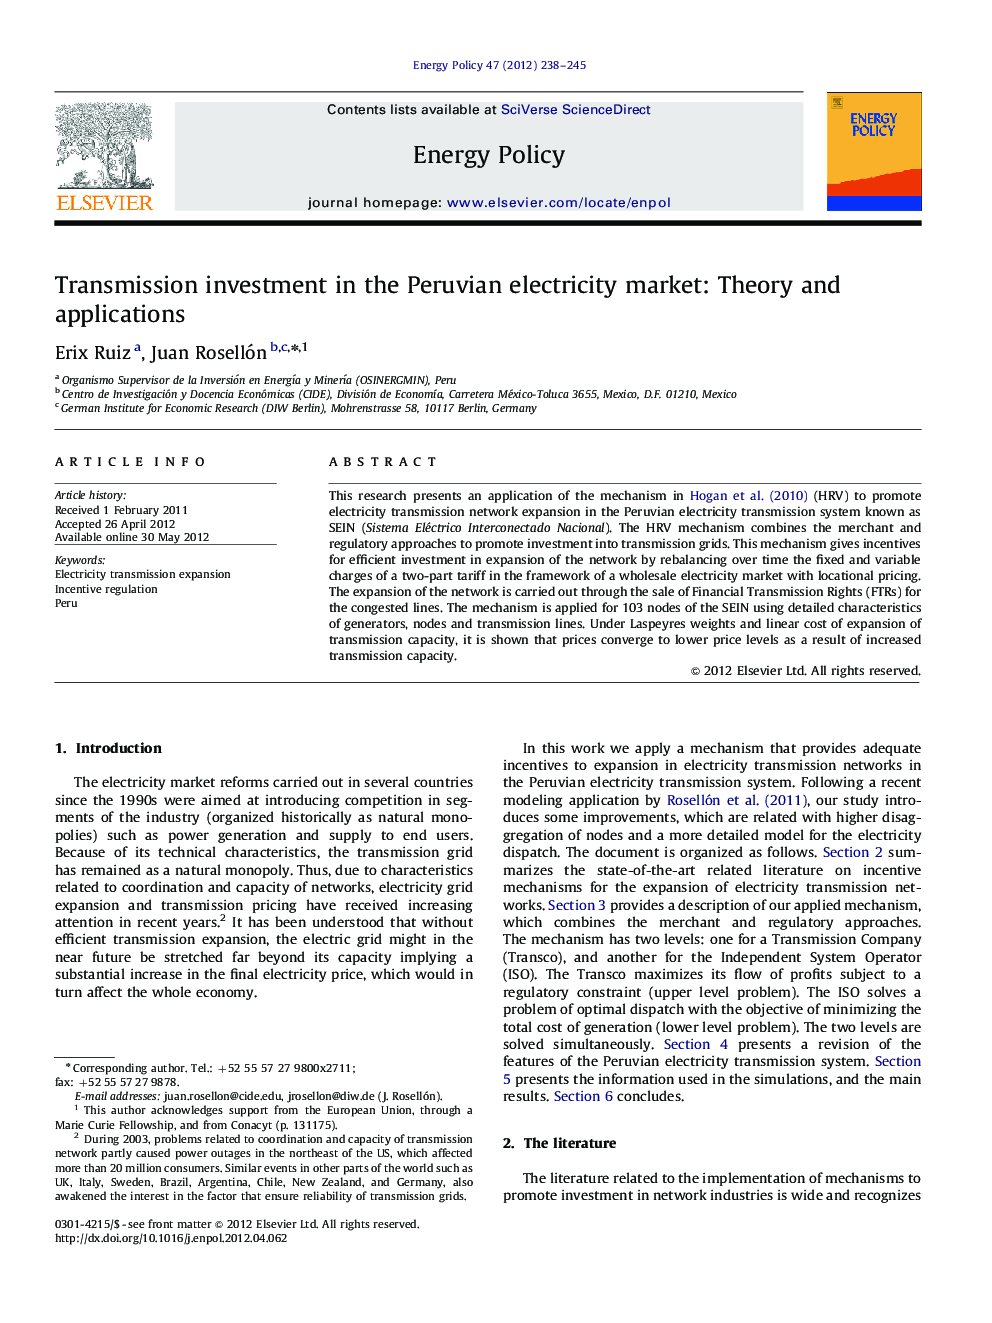 Transmission investment in the Peruvian electricity market: Theory and applications